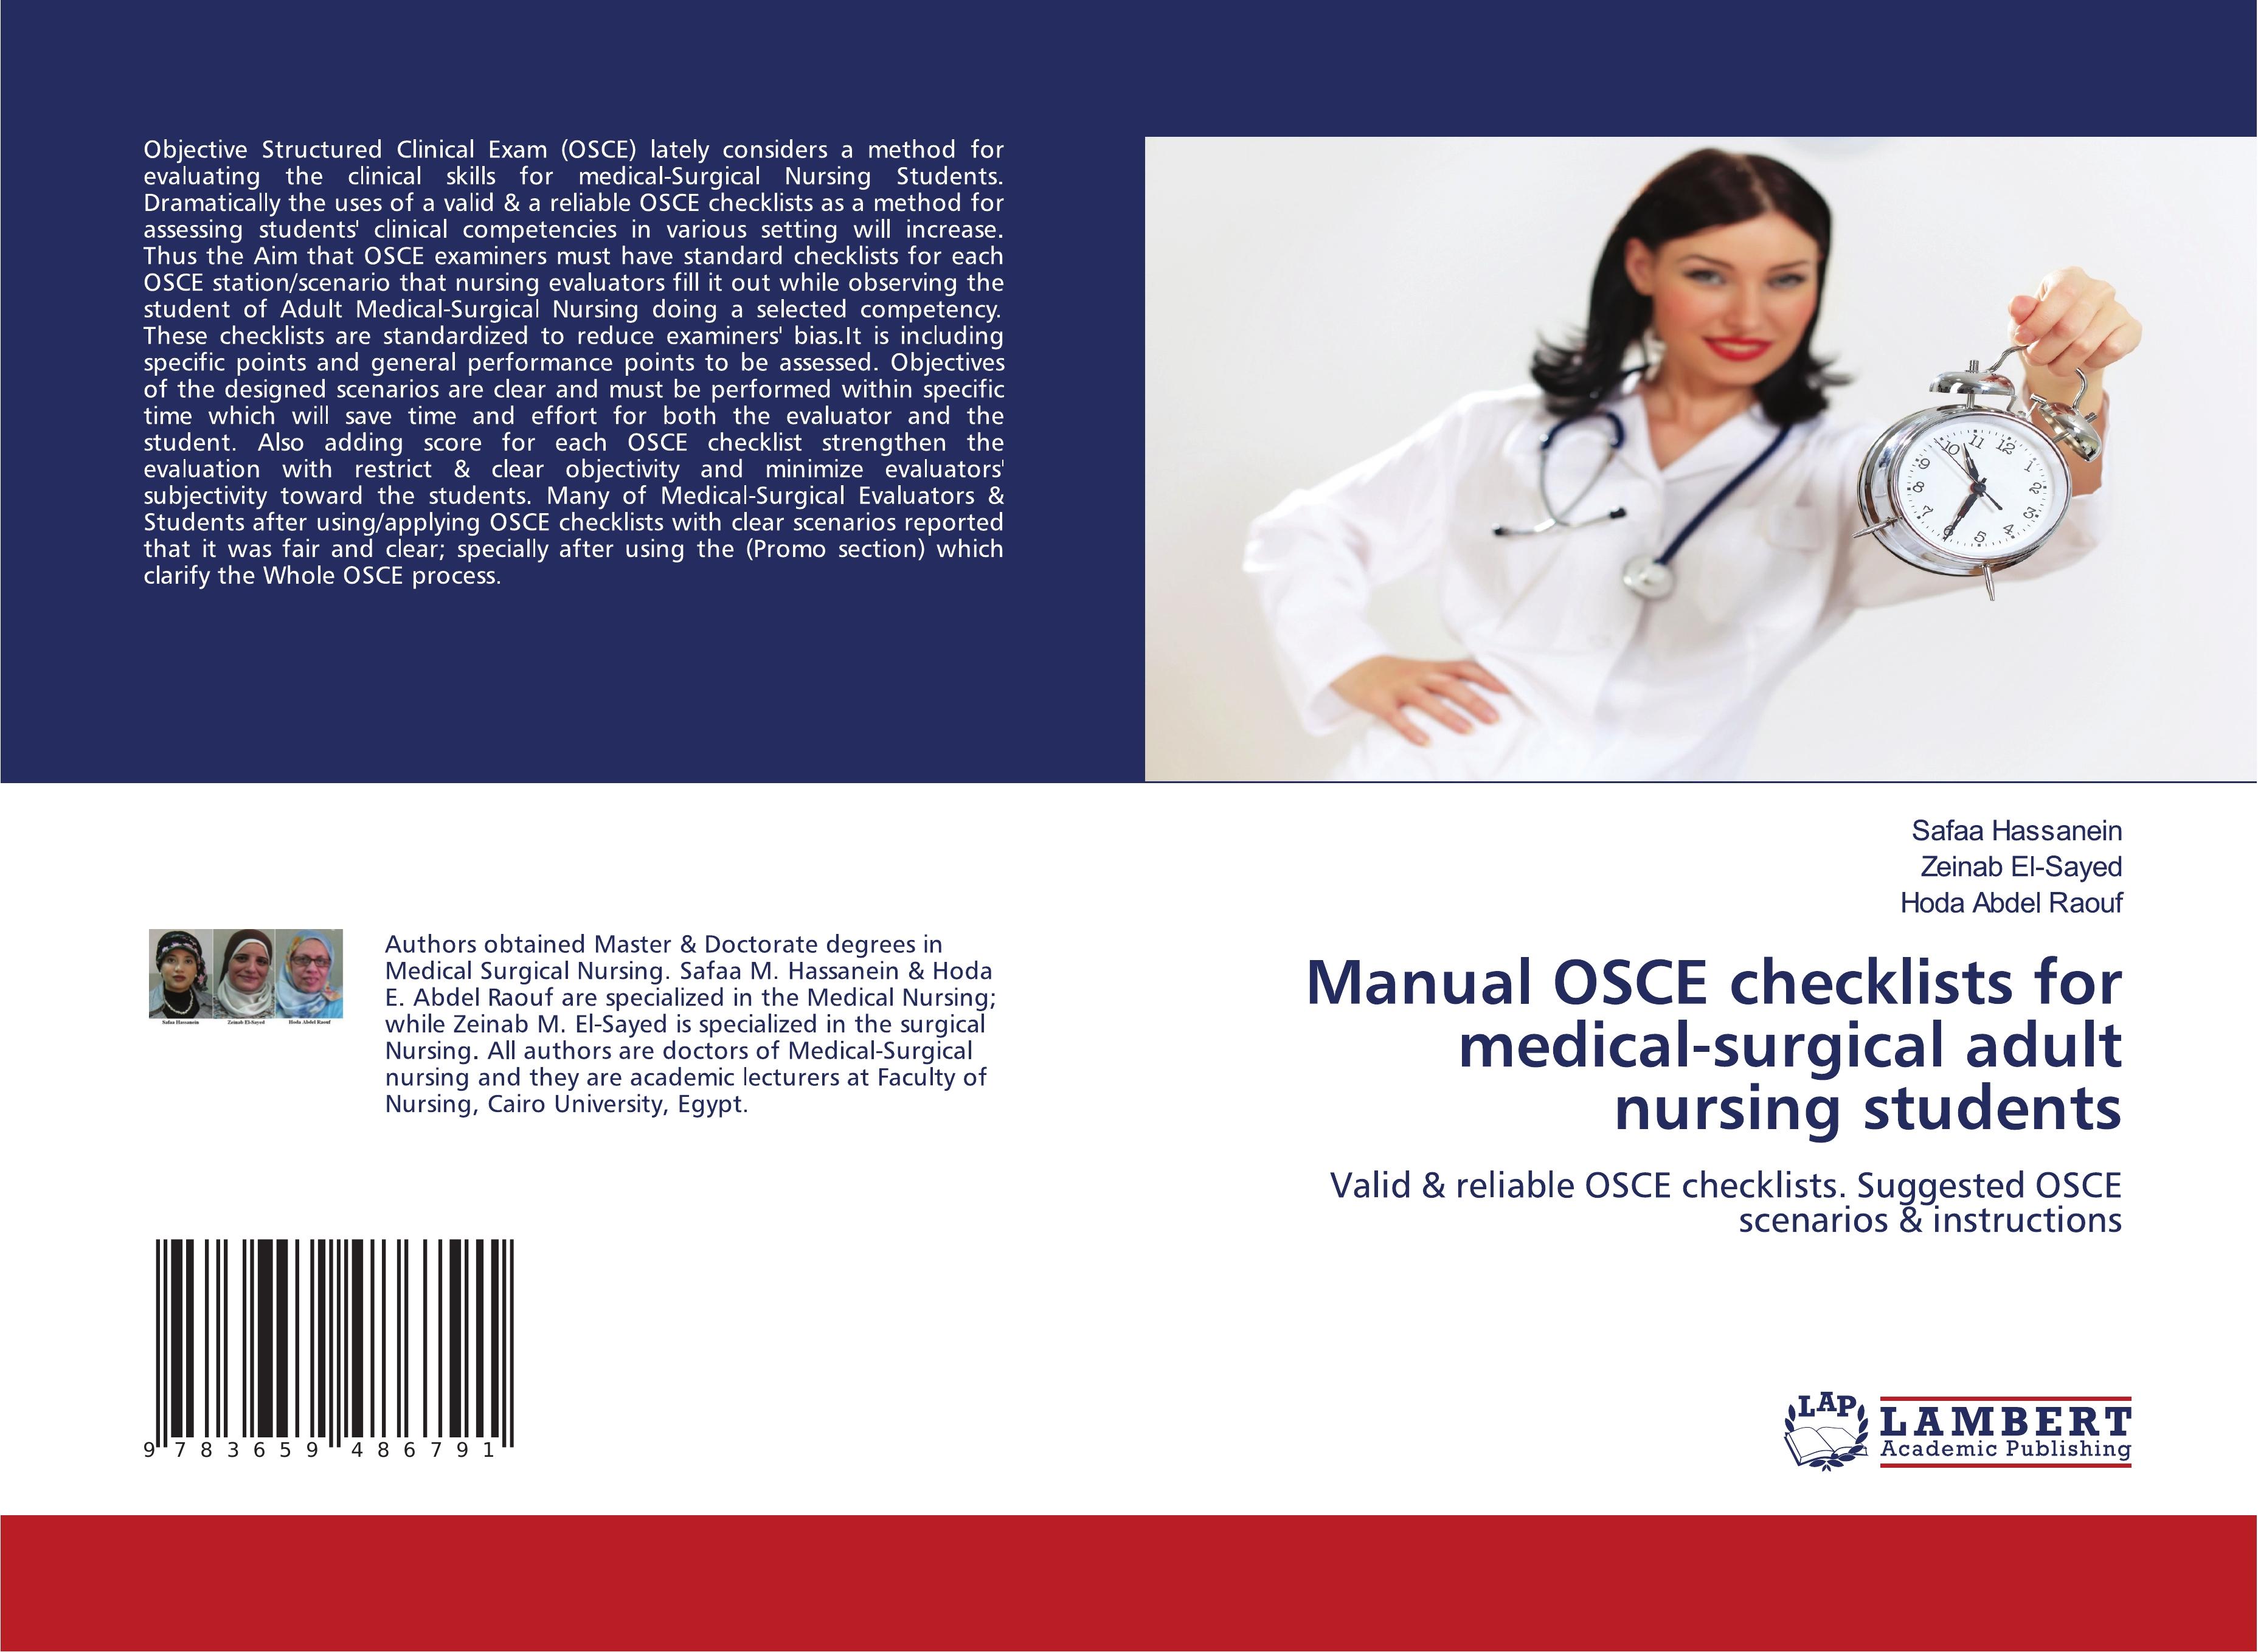 Manual OSCE checklists for medical-surgical adult nursing students - Safaa Hassanein Zeinab El-Sayed Hoda Abdel Raouf